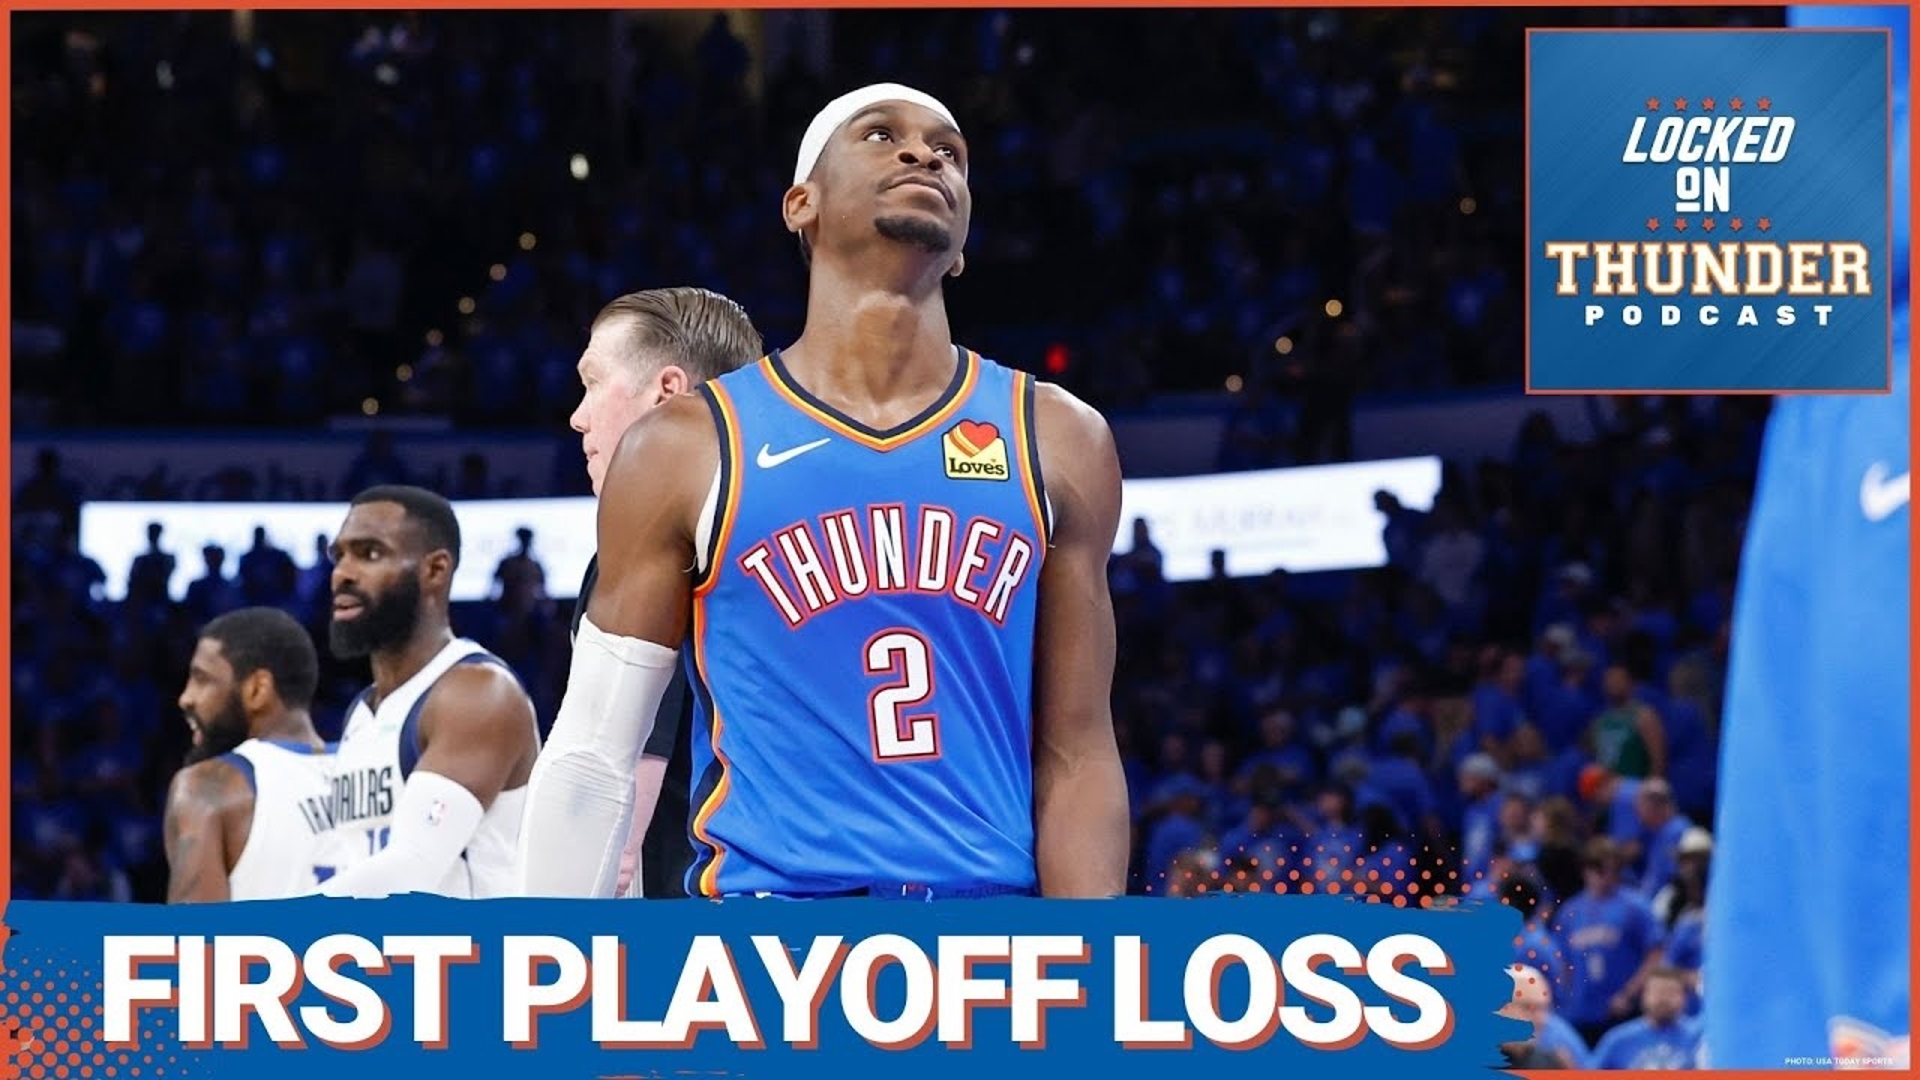 The Oklahoma City Thunder suffer their first playoff loss against the Dallas Mavericks in Game 2 of their series. What went wrong for the OKC Thunder?